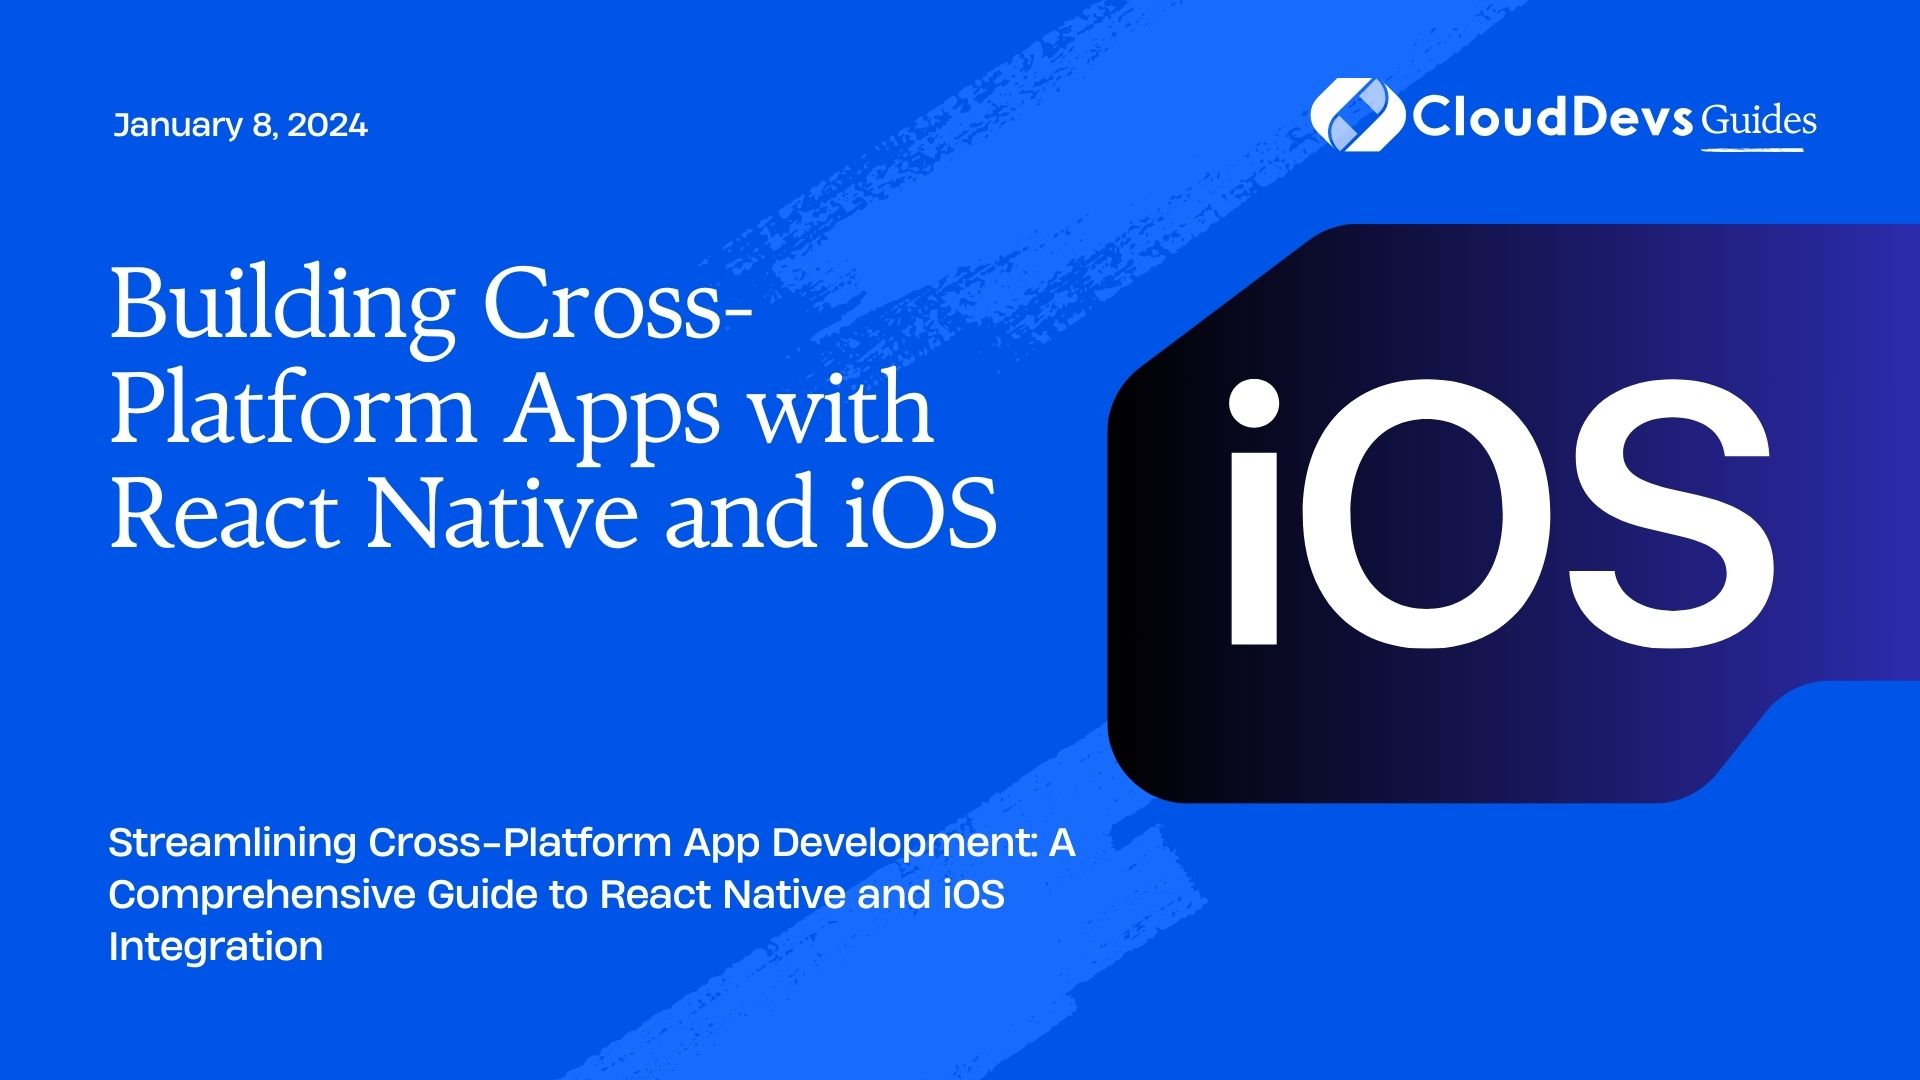 Building Cross-Platform Apps with React Native and iOS